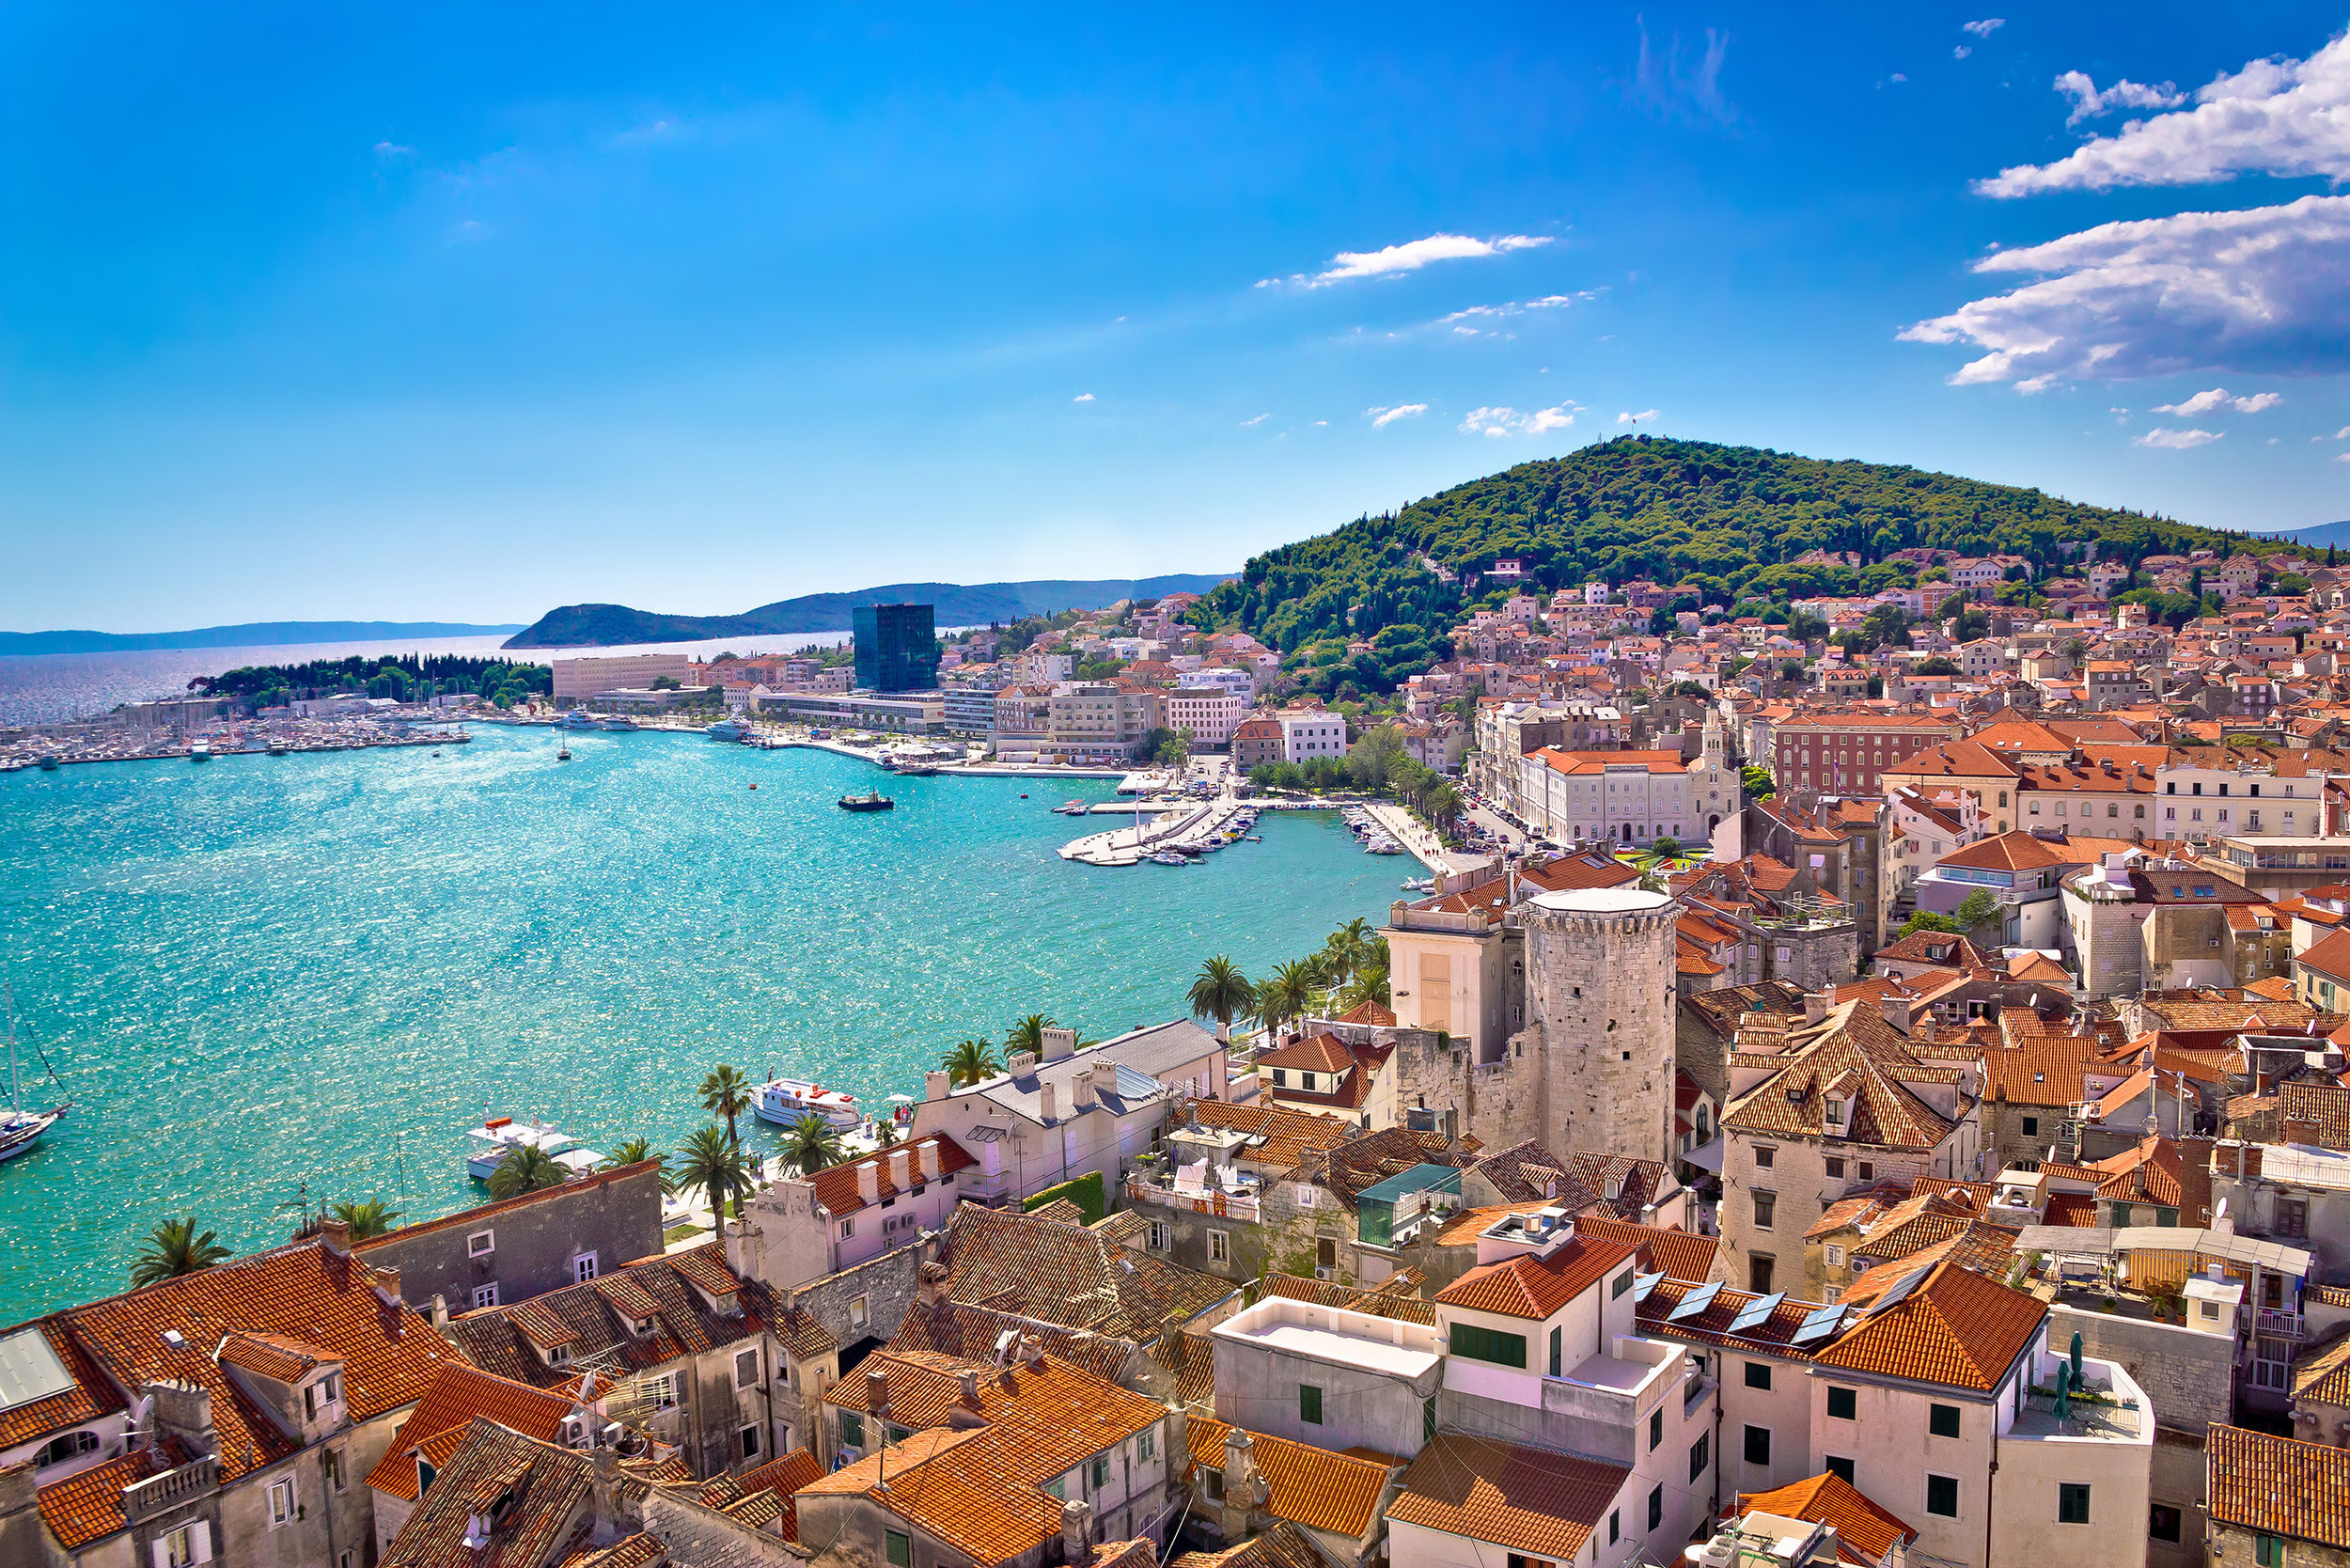 <p>Travelers flock to southern Croatia for a reason: it’s amazing. Rent a car in Split or Dubrovnik, take a ferry to an island, check out Zadar and Cavat, and then head to Montenegro. Must-sees in this country include Herceg Novi, Kotor, and Budva.</p><p>You may also like: <a href='https://www.yardbarker.com/lifestyle/articles/20_essential_travel_hacks_021824/s1__38265139'>20 essential travel hacks</a></p>